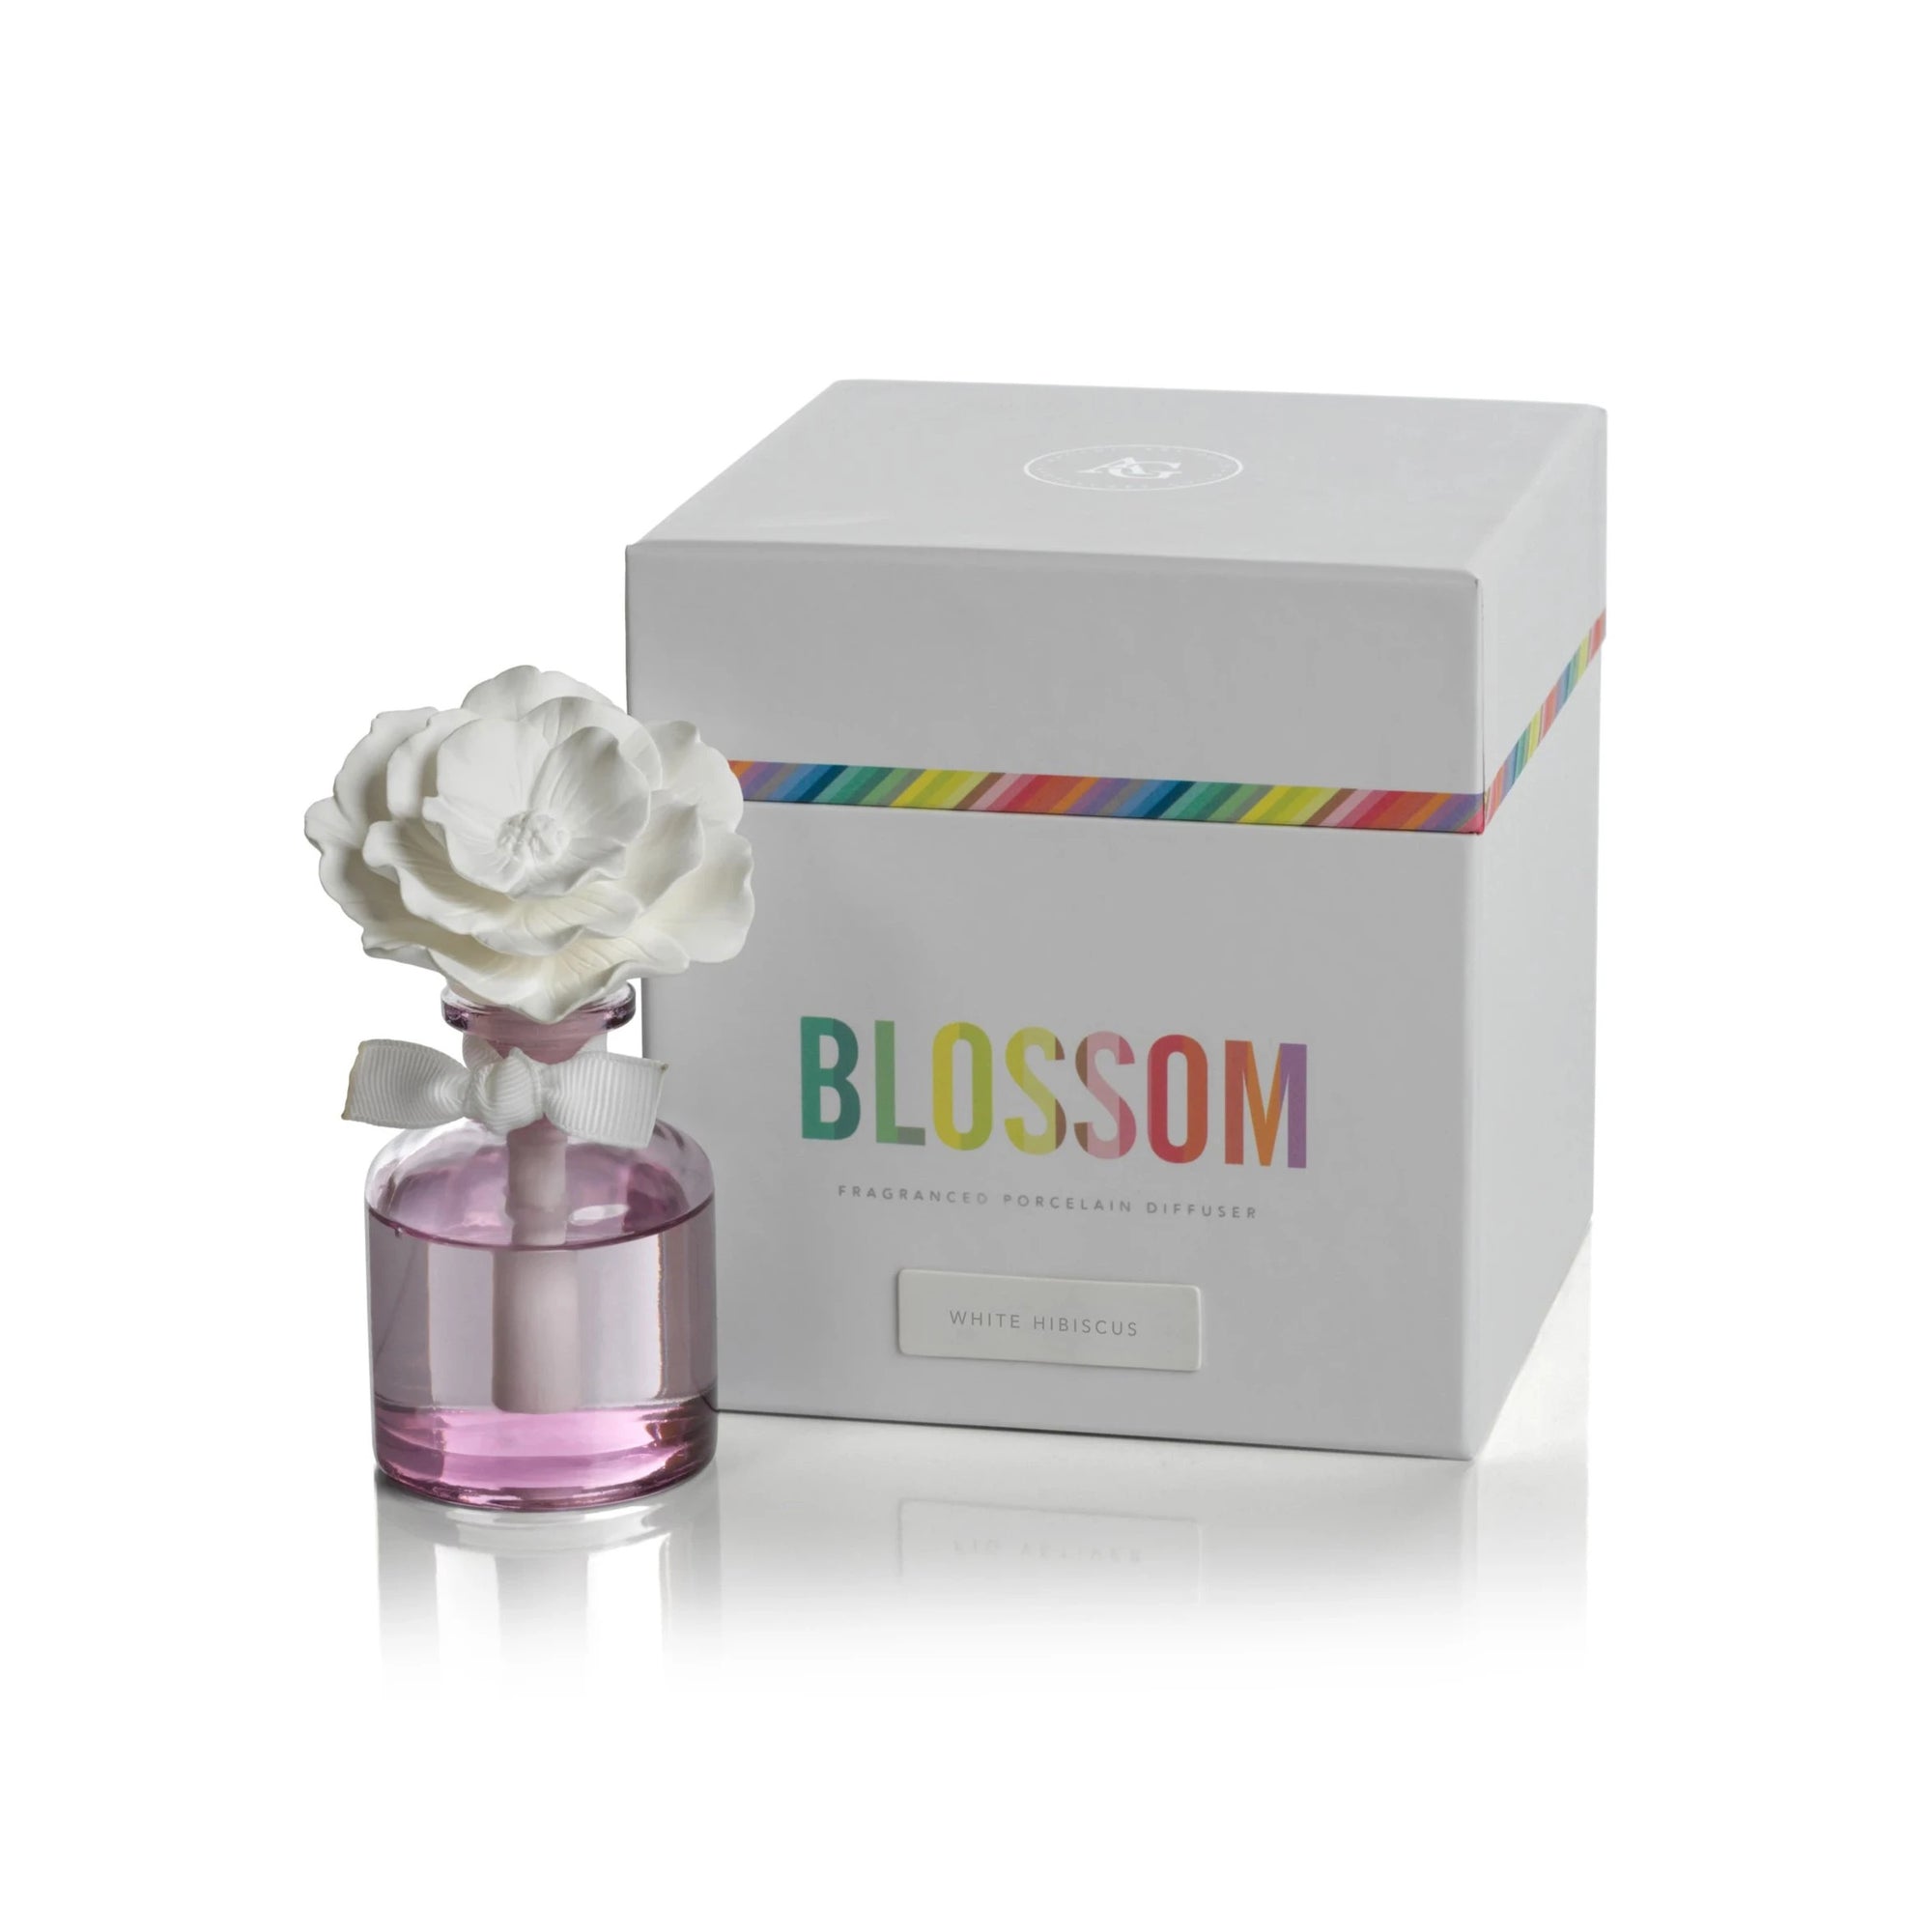 Blossom Porcelain Diffuser, Assorted Scents